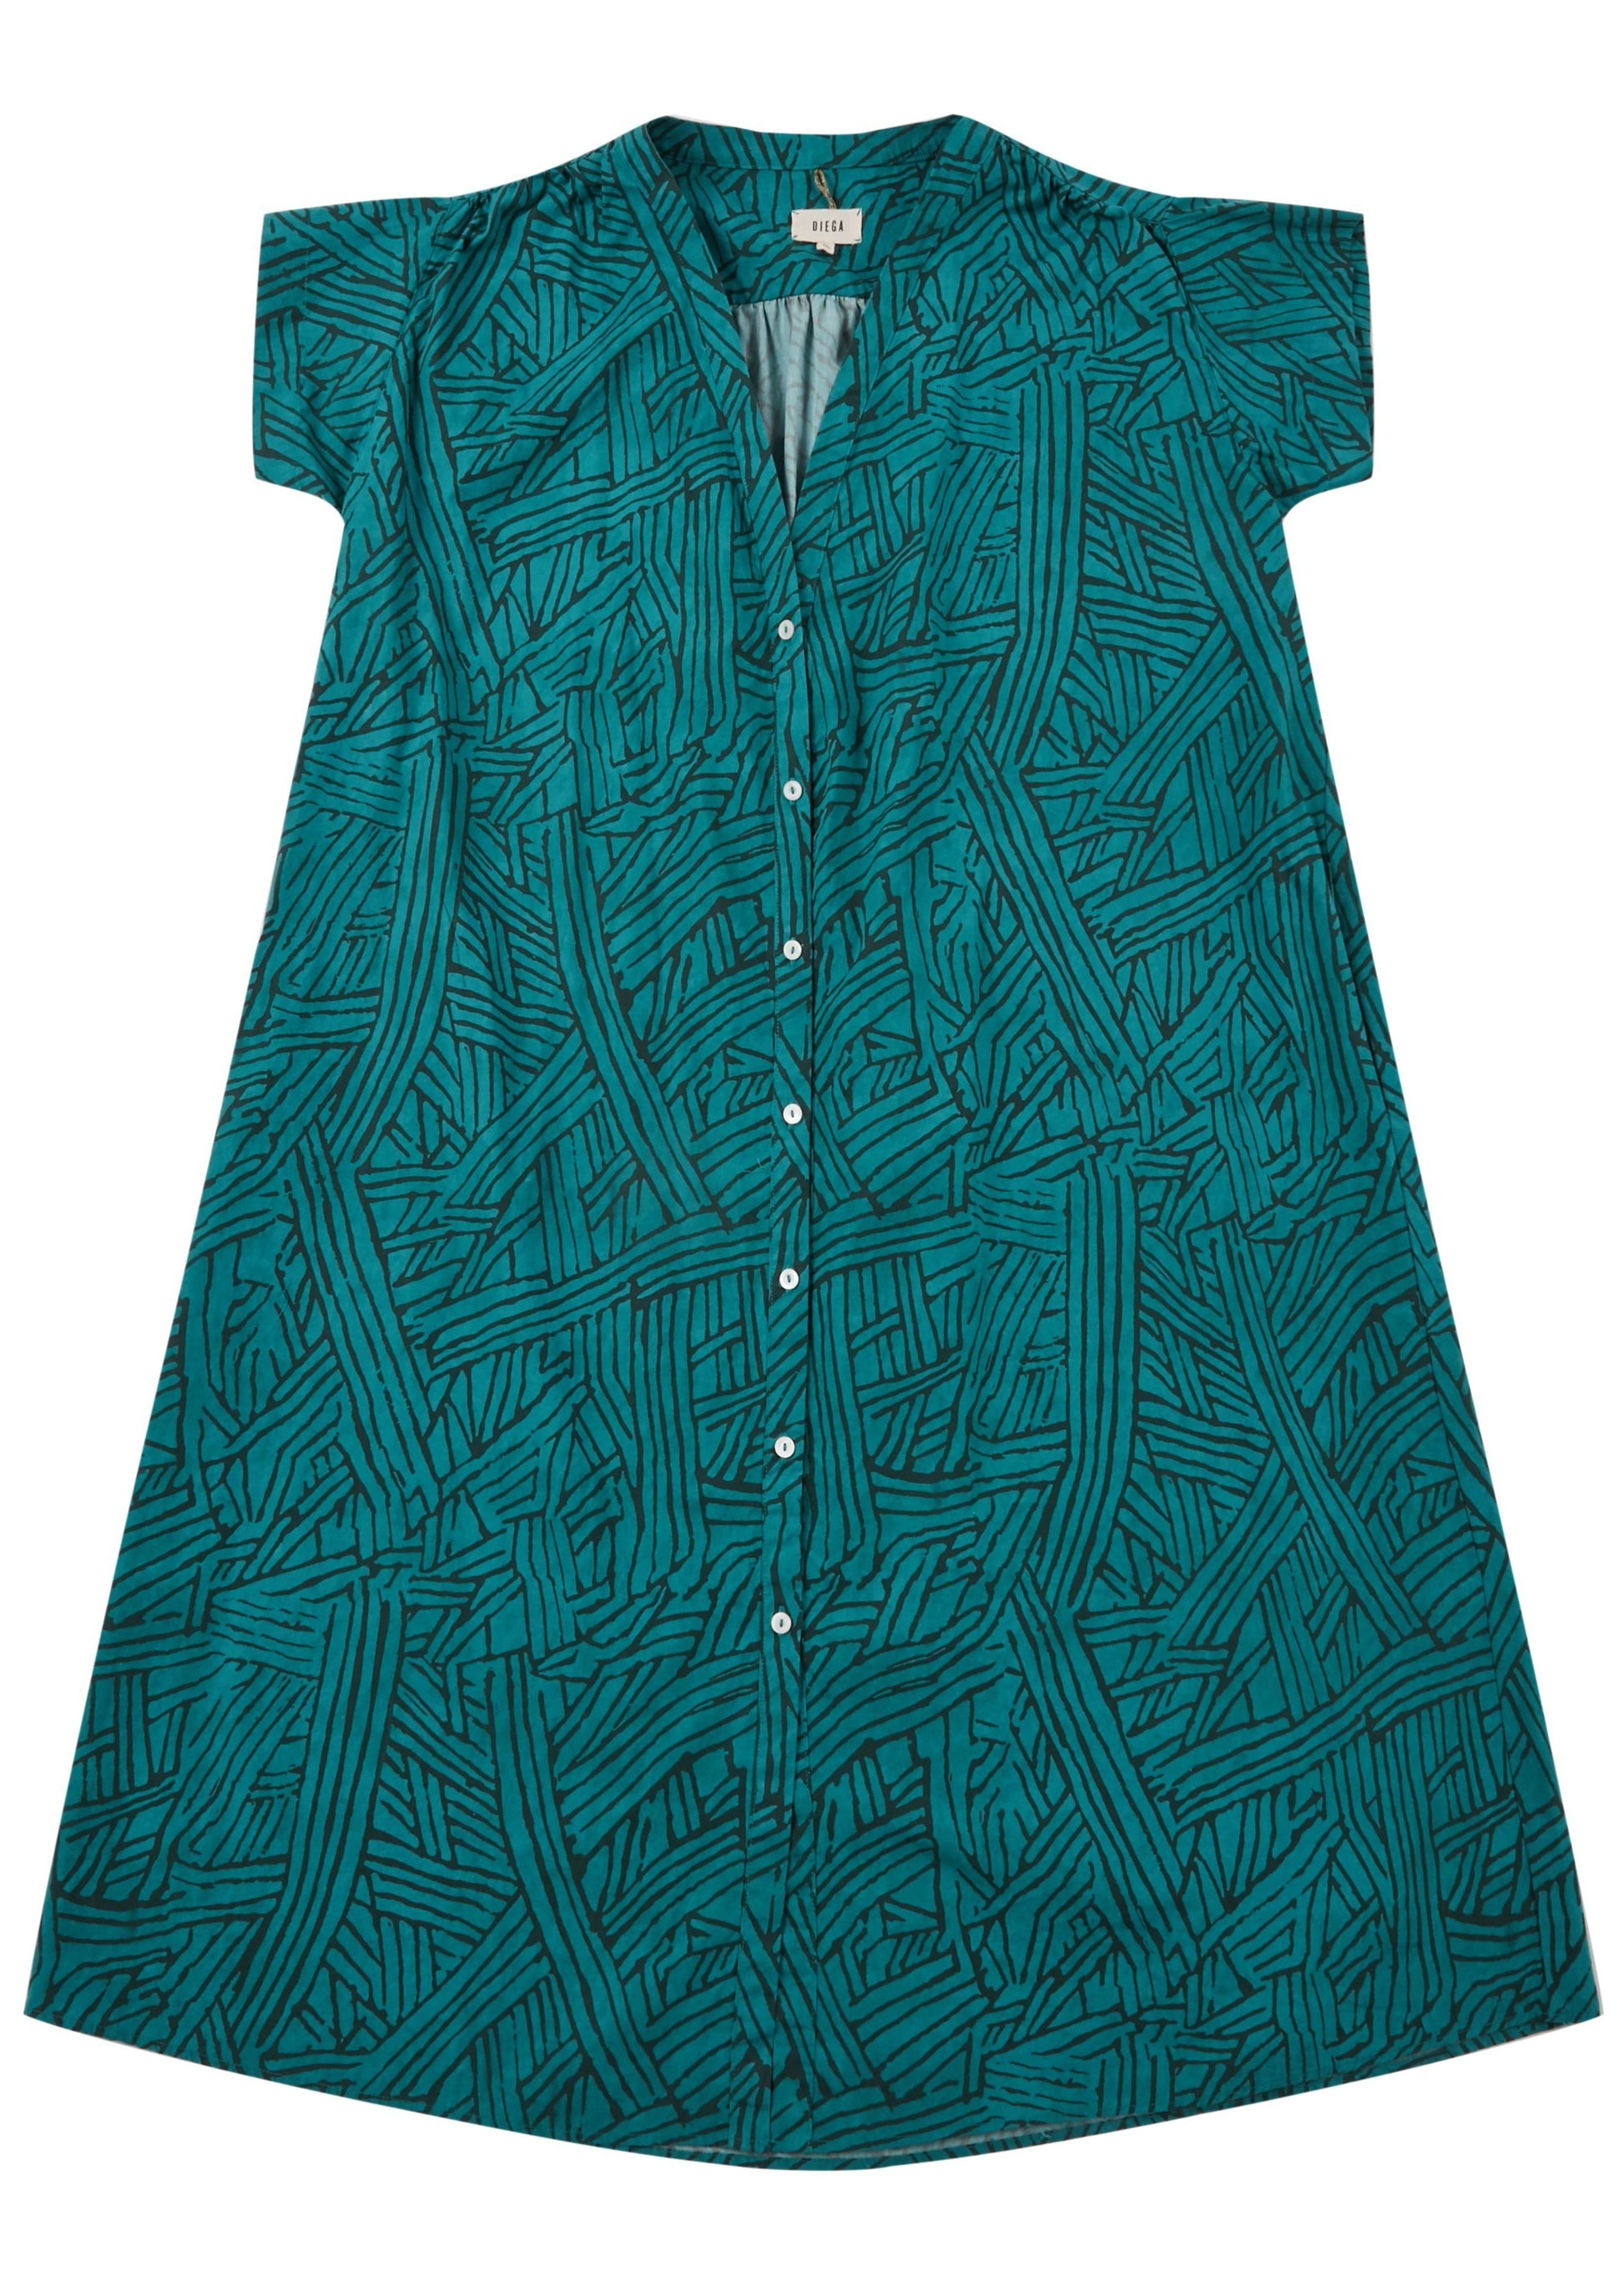 Diega Rocha Turquoise Teal Printed Dress Buttoned